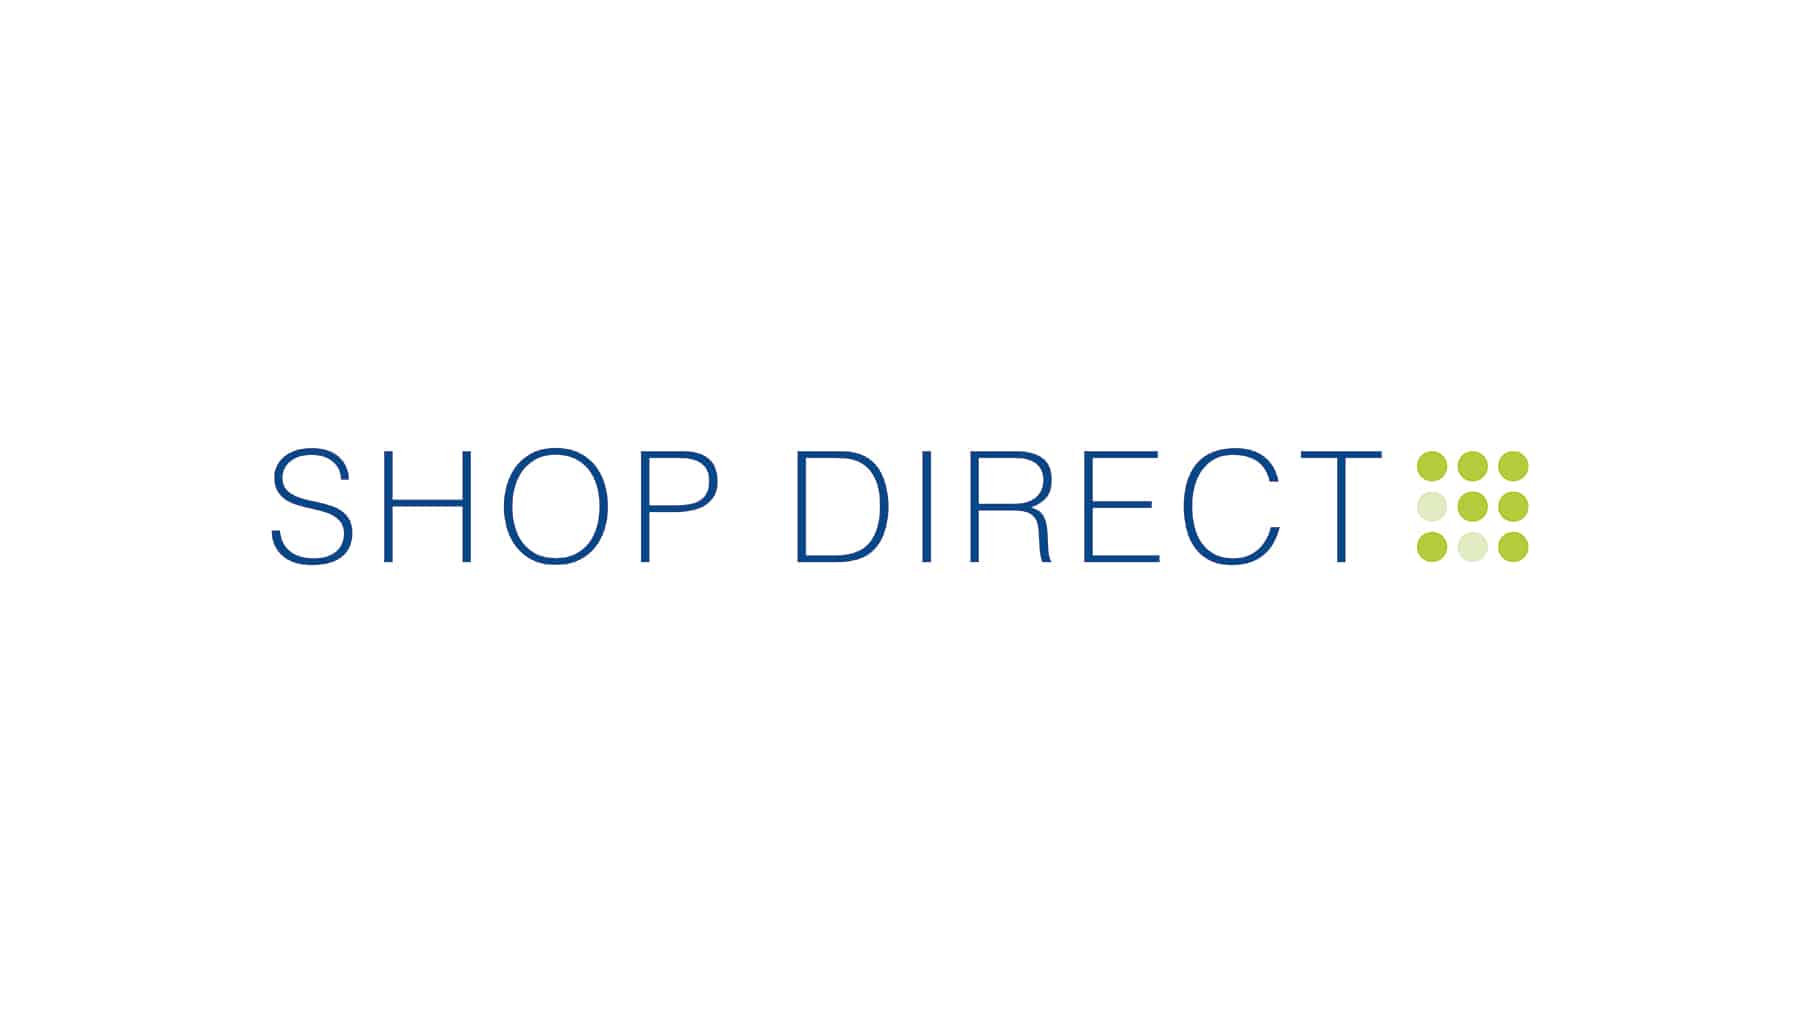 Shop Direct to enhance online and mobile customer experience